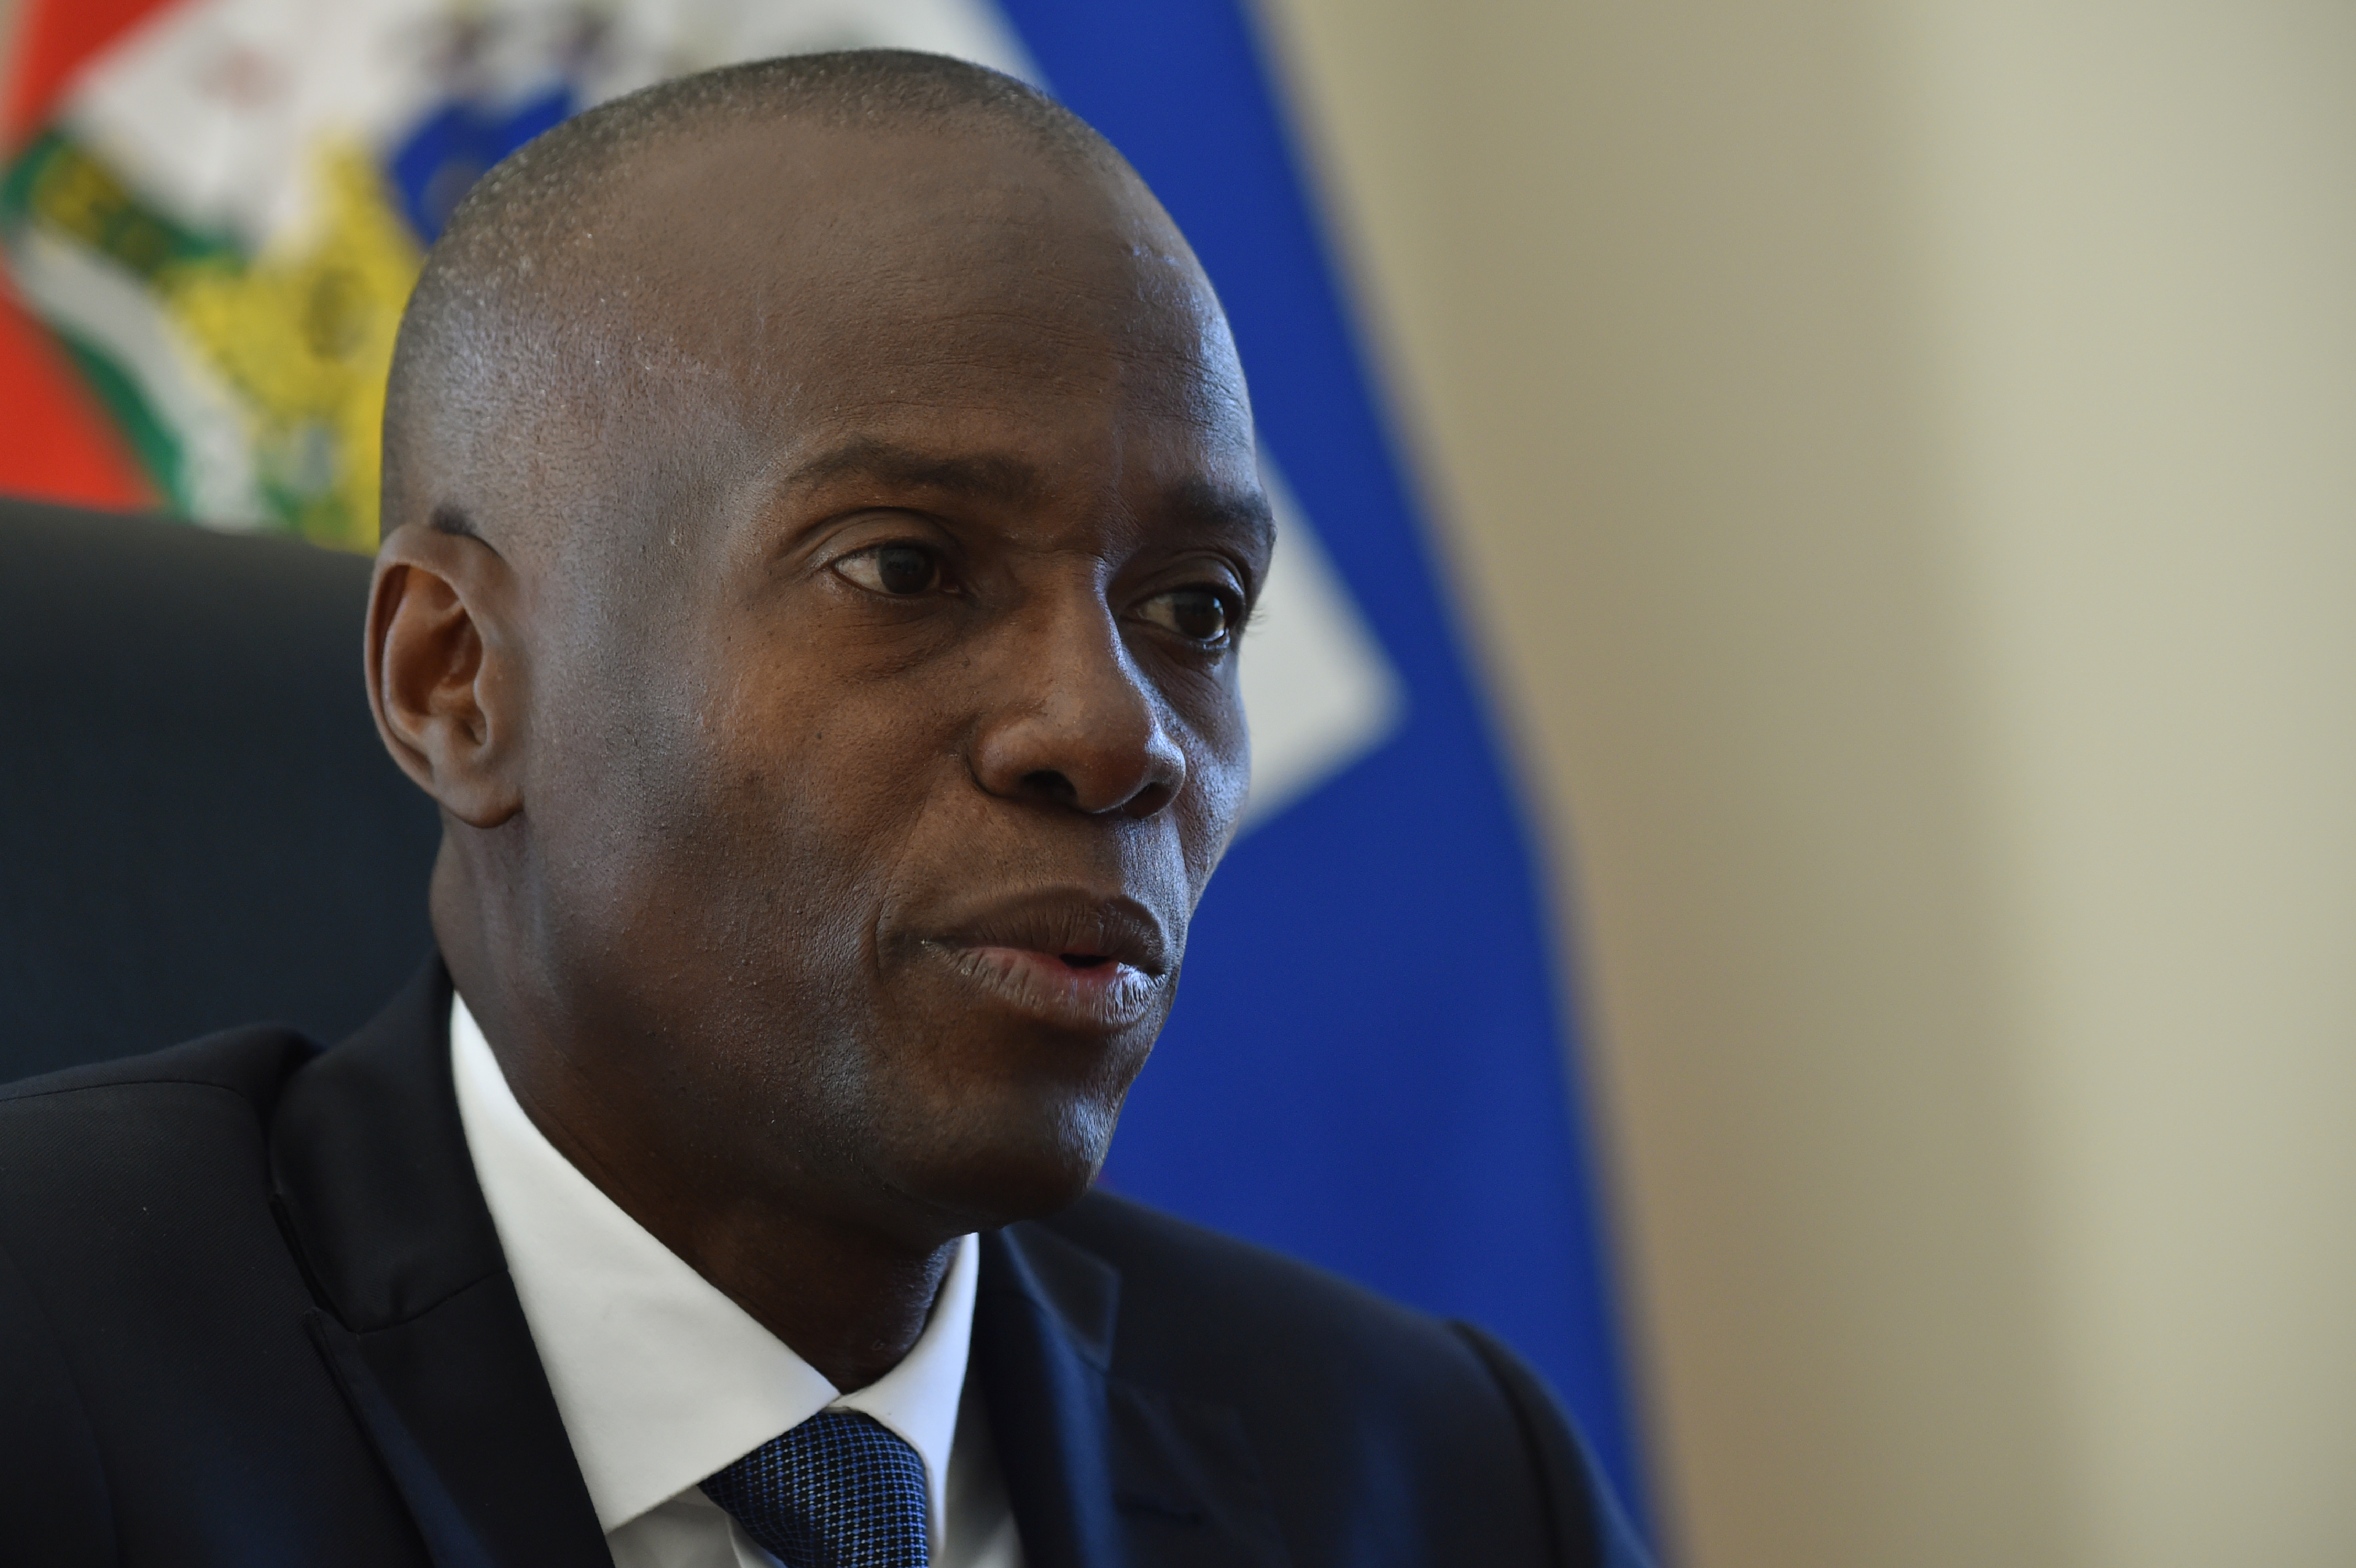 Jovenel Moise of PHTK political party, and new president of Haiti, according to the preliminary results that were given to the Provisional Electoral Council (CEP), speaks during an interview with AFP, in the commune of Petion Ville, in the Haitian capital Port-au-Prince, on December 1, 2016. / AFP PHOTO / HECTOR RETAMAL